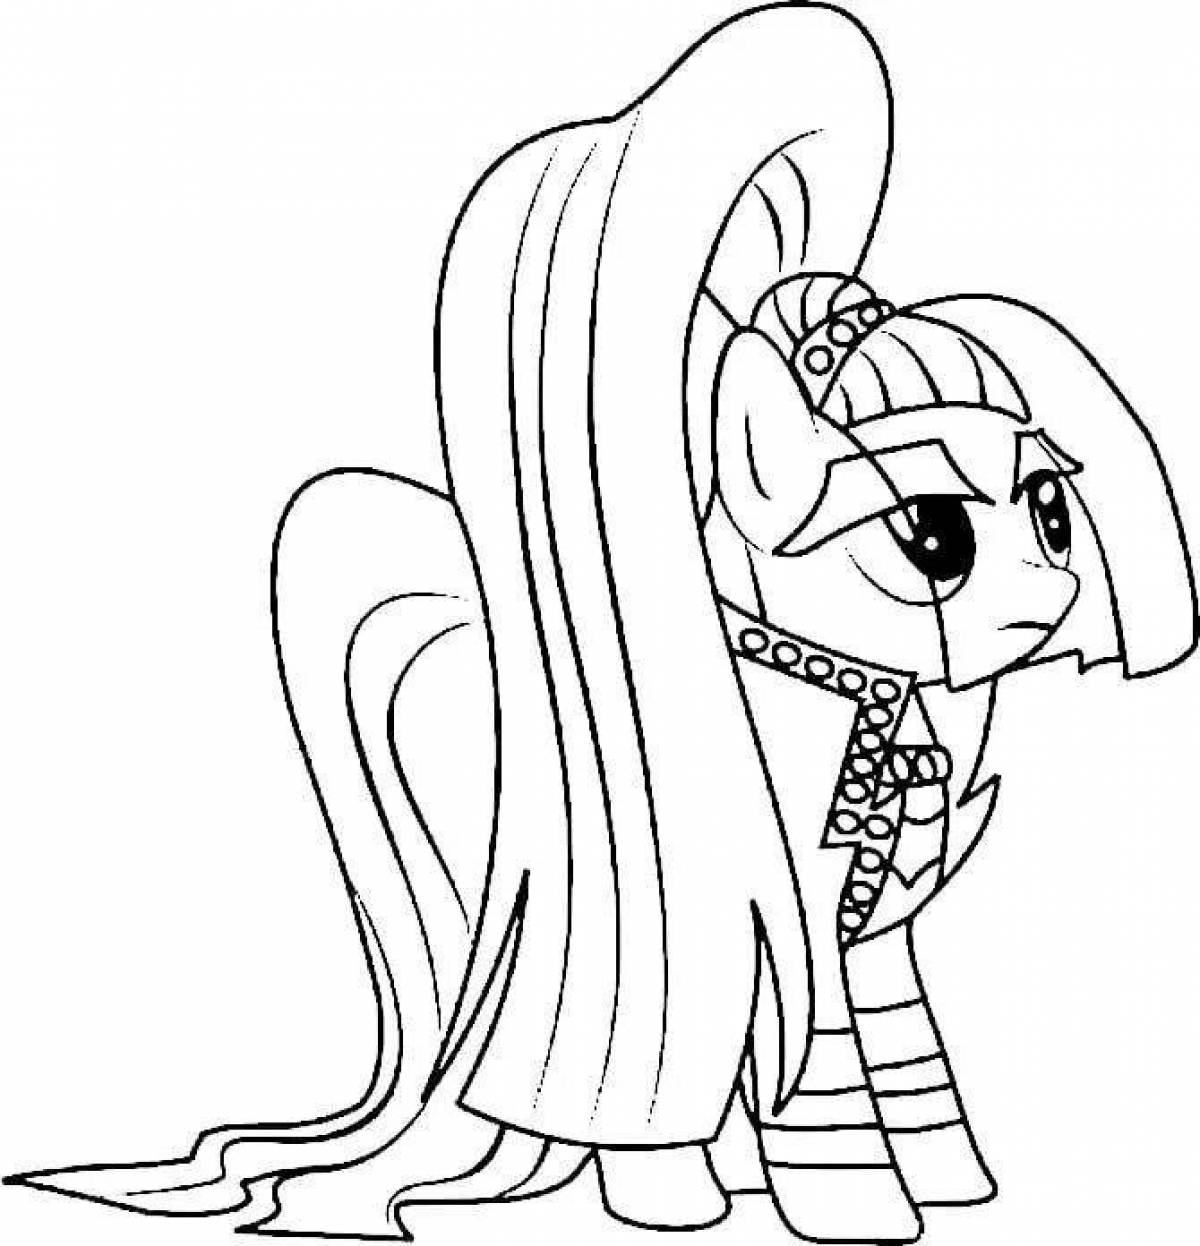 Fairy difficult pony coloring